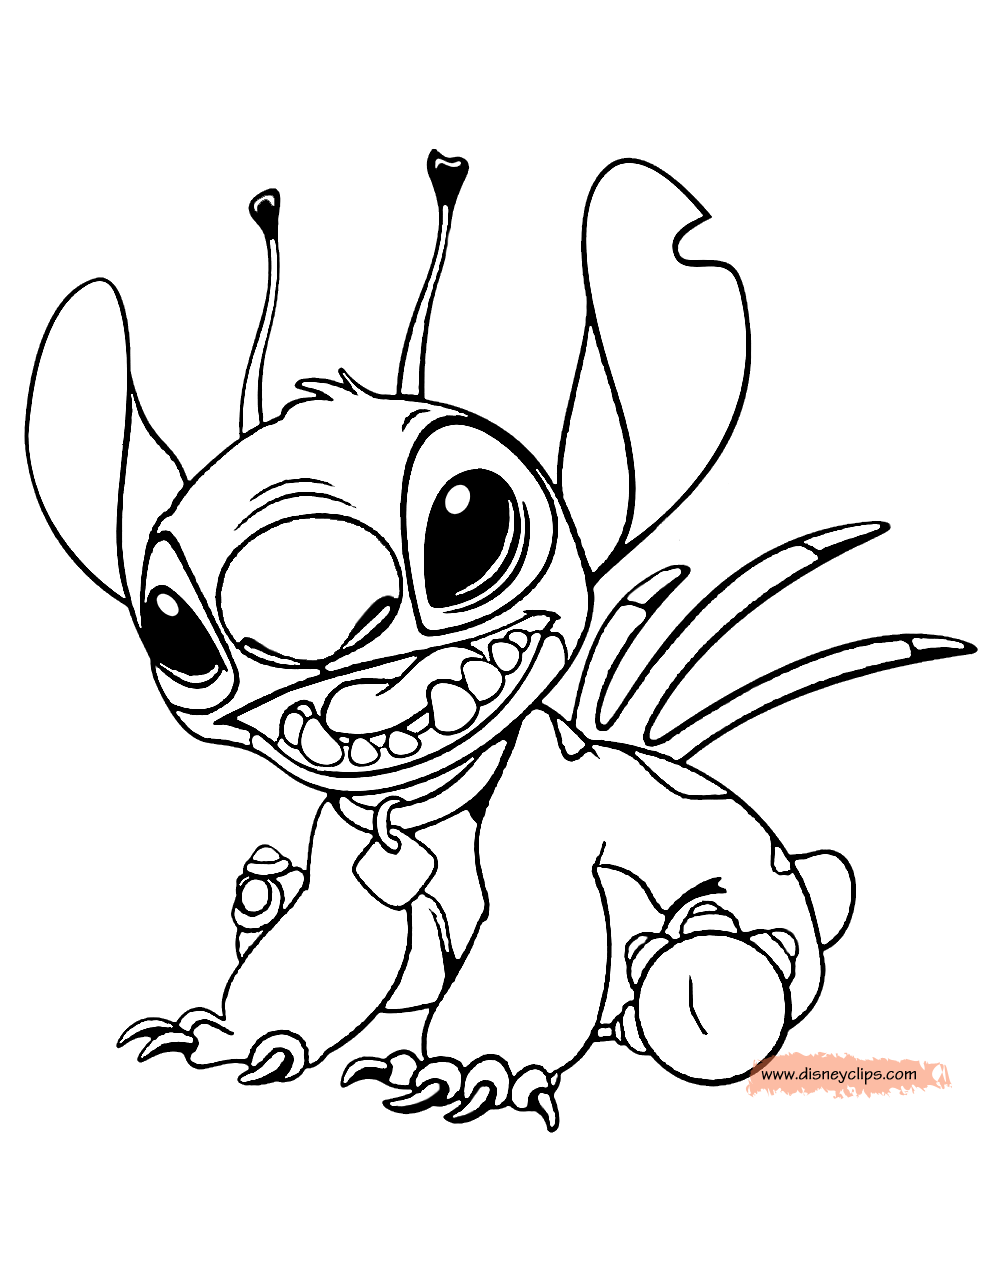 Lilo and Stitch Coloring Pages Disneyclipscom